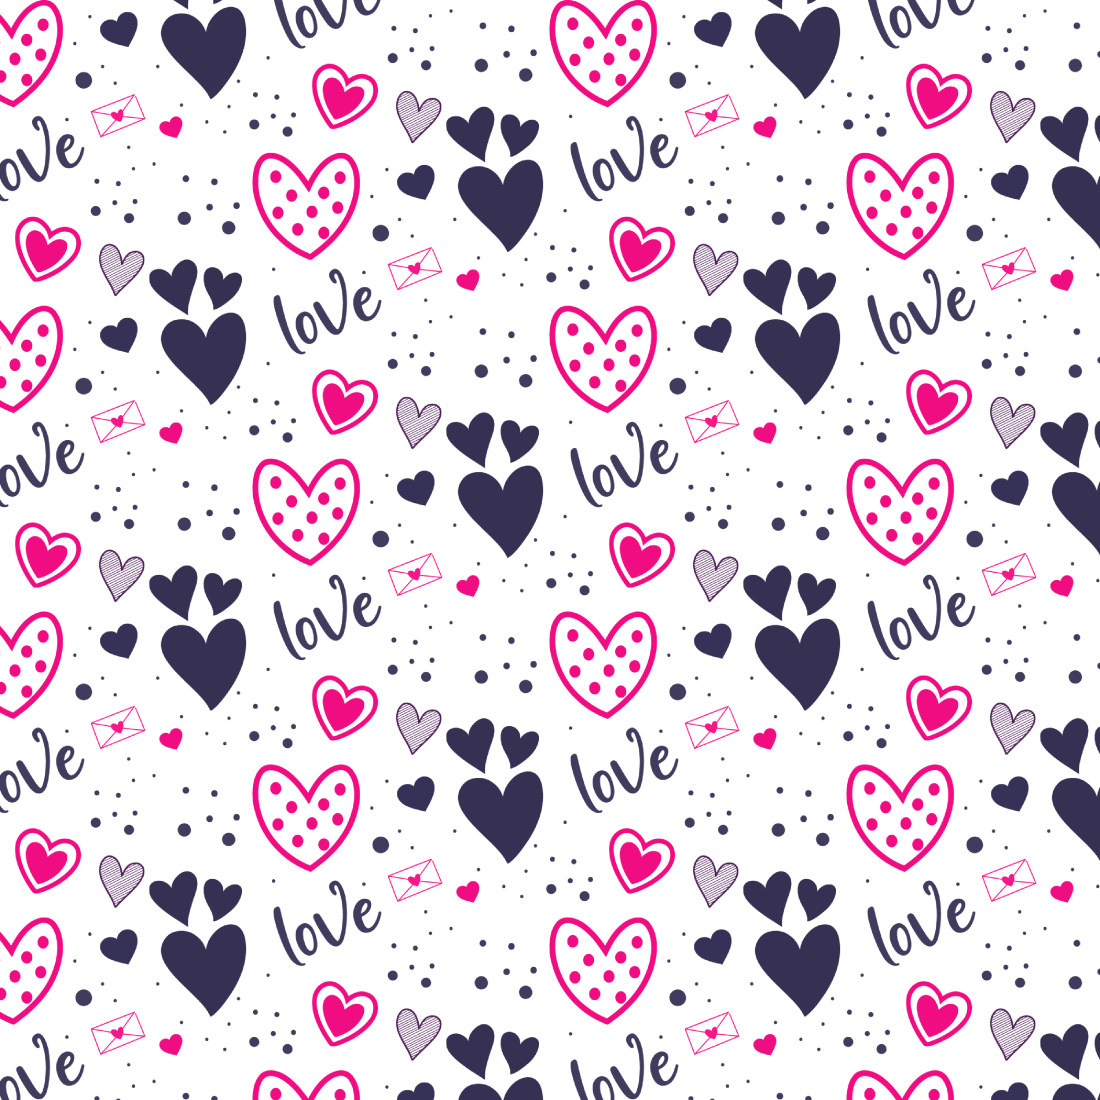 vector hand drawn valentines day pattern collection preview image.